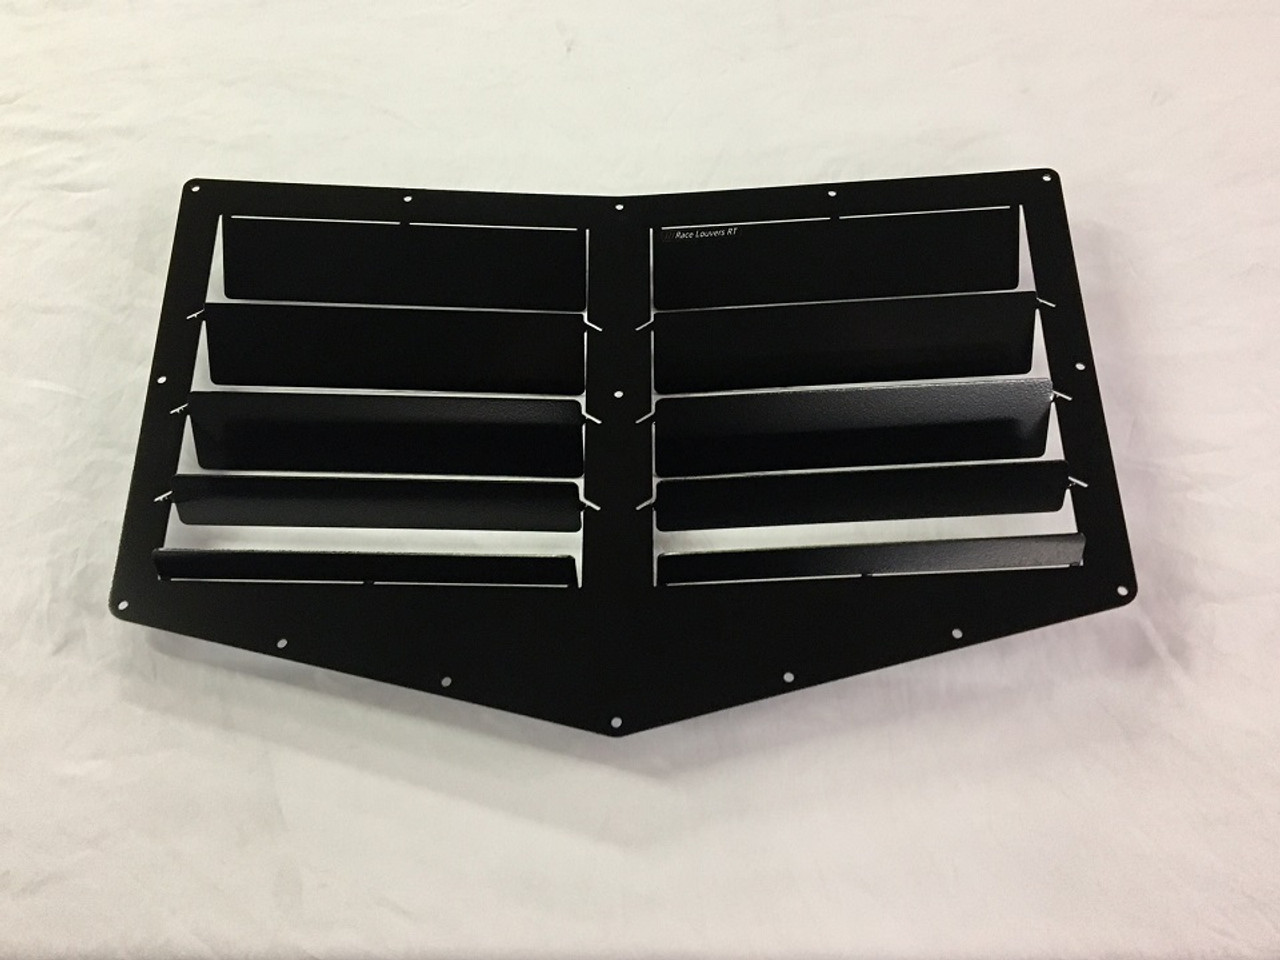 Race Louver RT trim center car hood extractor is designed for street, high performance driving and track duty